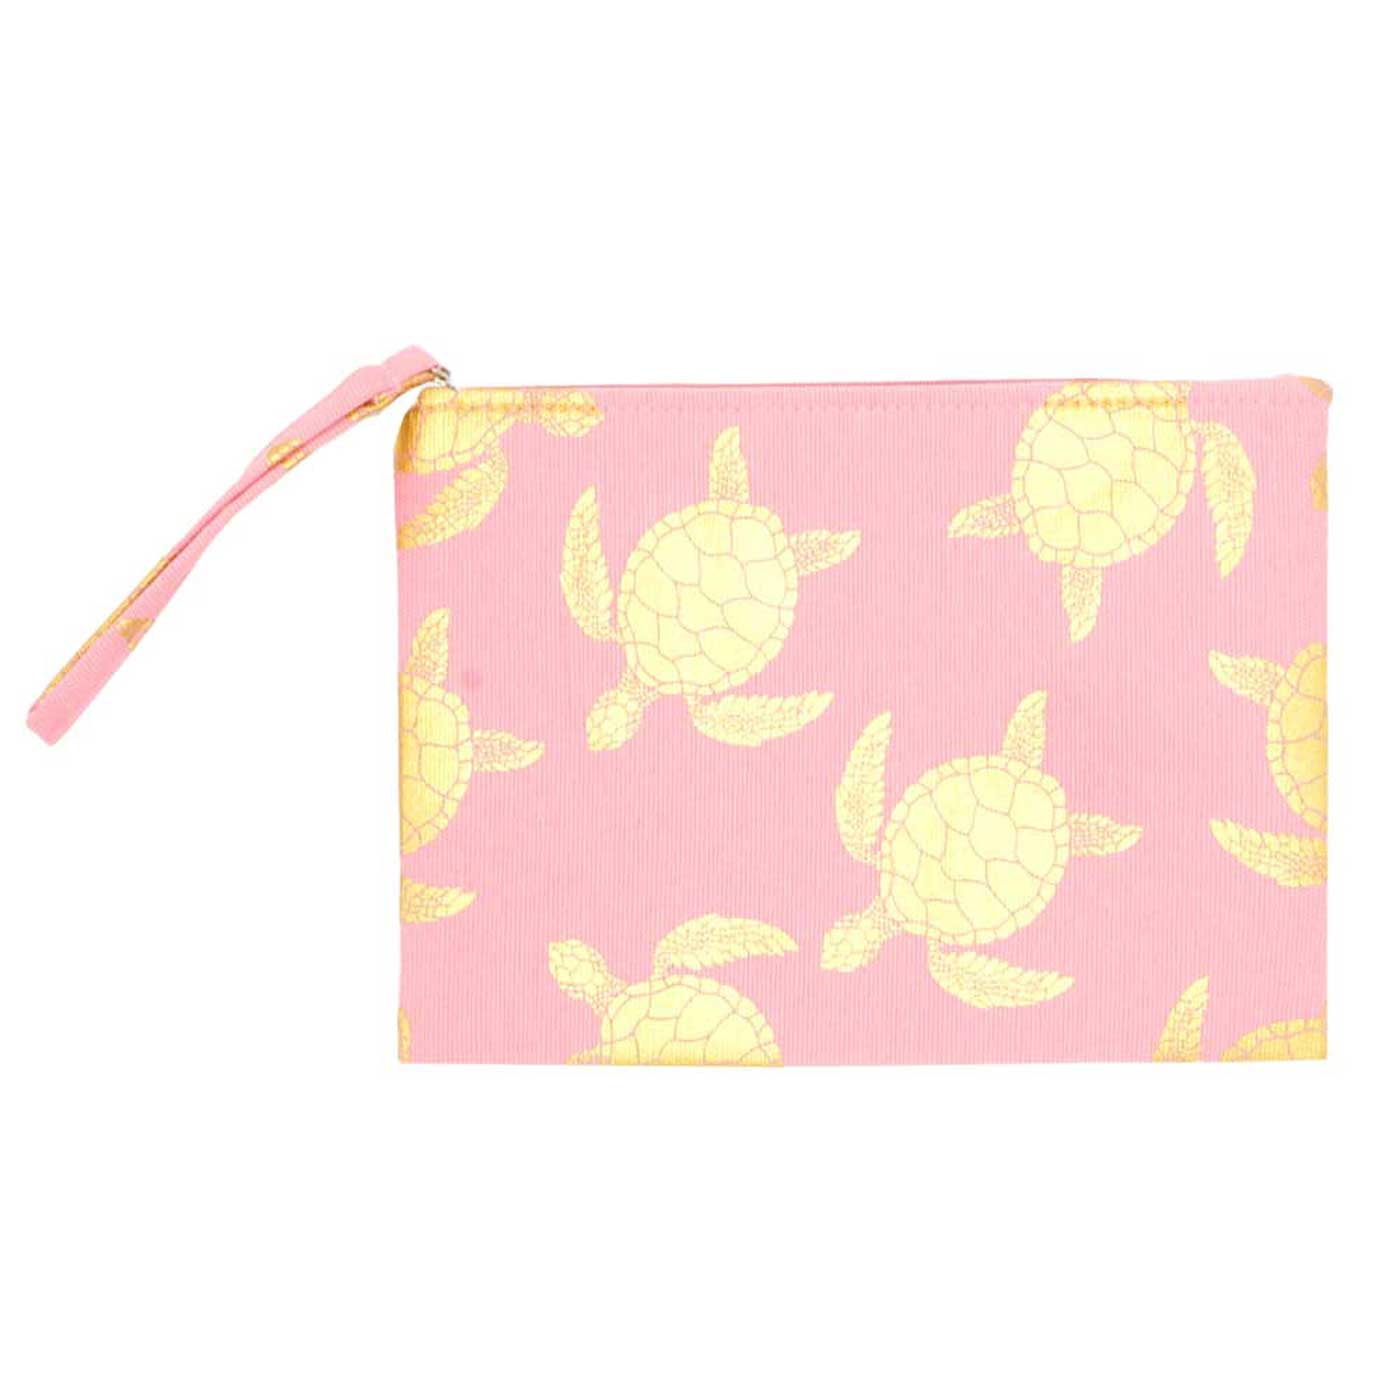 Pink Metallic Turtle Pouch Clutch Bag. Whether you are out shopping, going to the pool or beach, this sea life turtle themed clutch bag is the perfect accessory. Spacious enough for carrying any and all of your seaside essentials. Perfect Birthday Gift, Anniversary Gift, Just Because Gift, Mother's day Gift, Summer, Sea Life & night out on the beach etc.